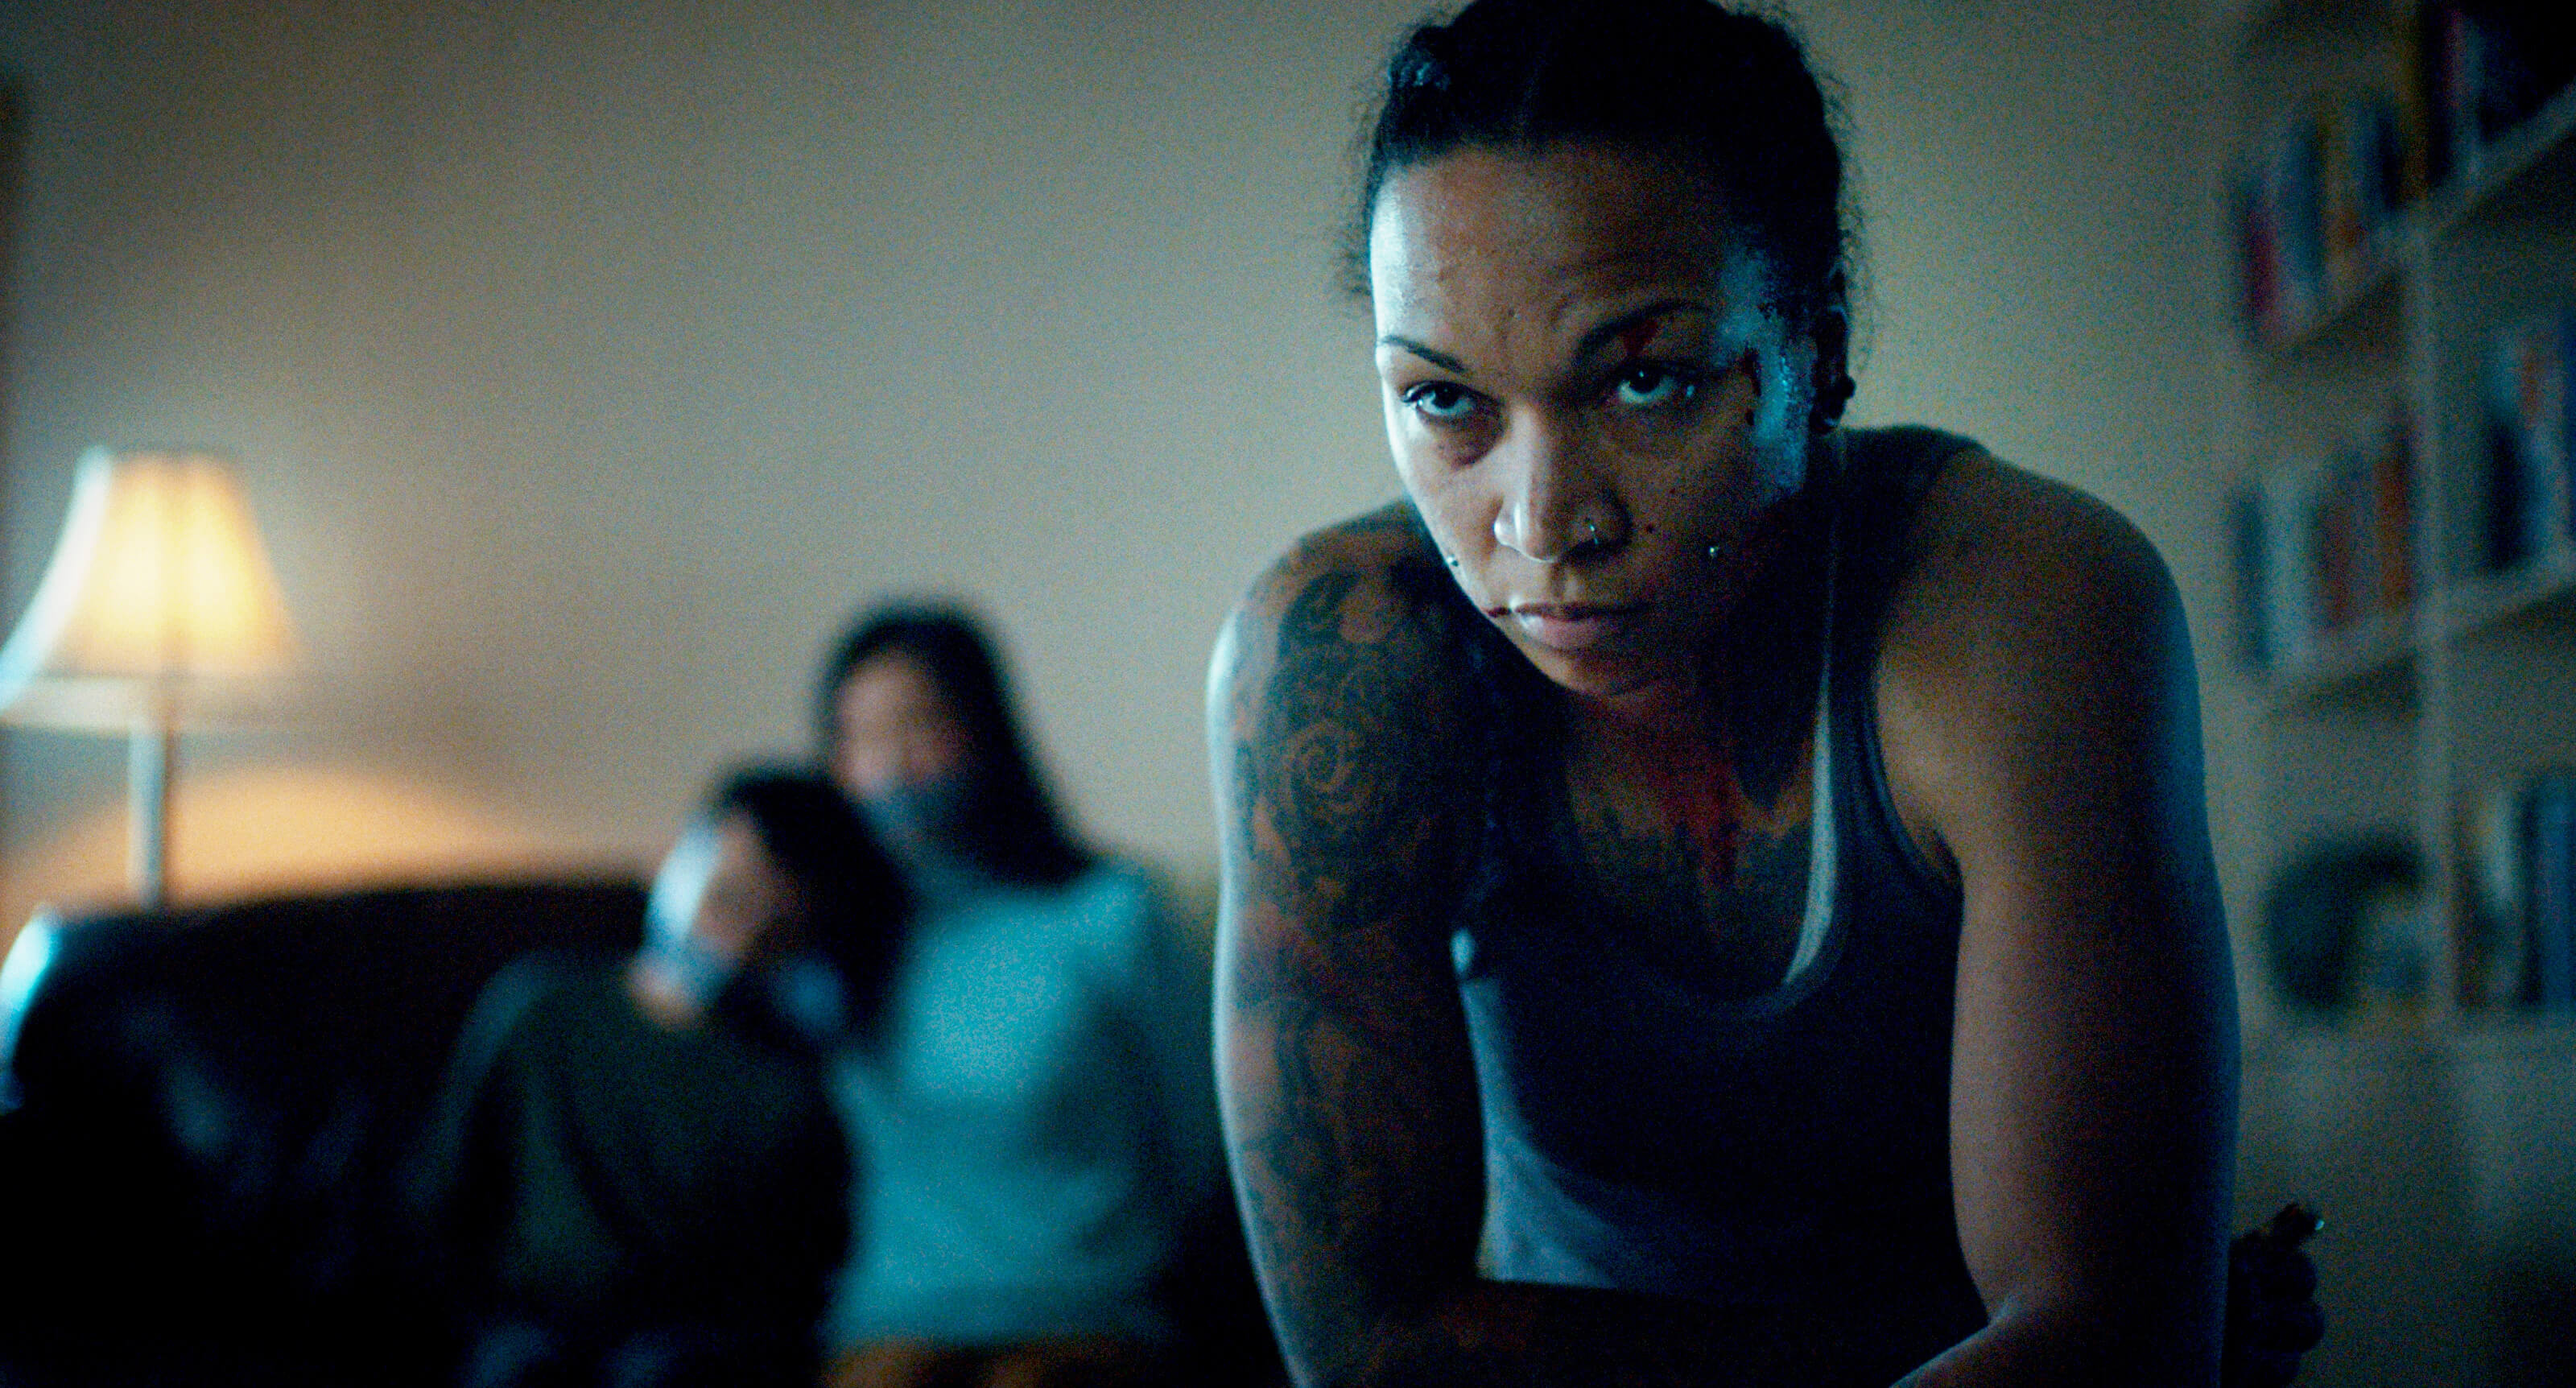 Catch the Fair One Trailer, Native American boxer Kaylee embarks on the fight of her life when she goes undercover in a sex trafficking operation to seek revenge against the men who kidnapped her sister. 